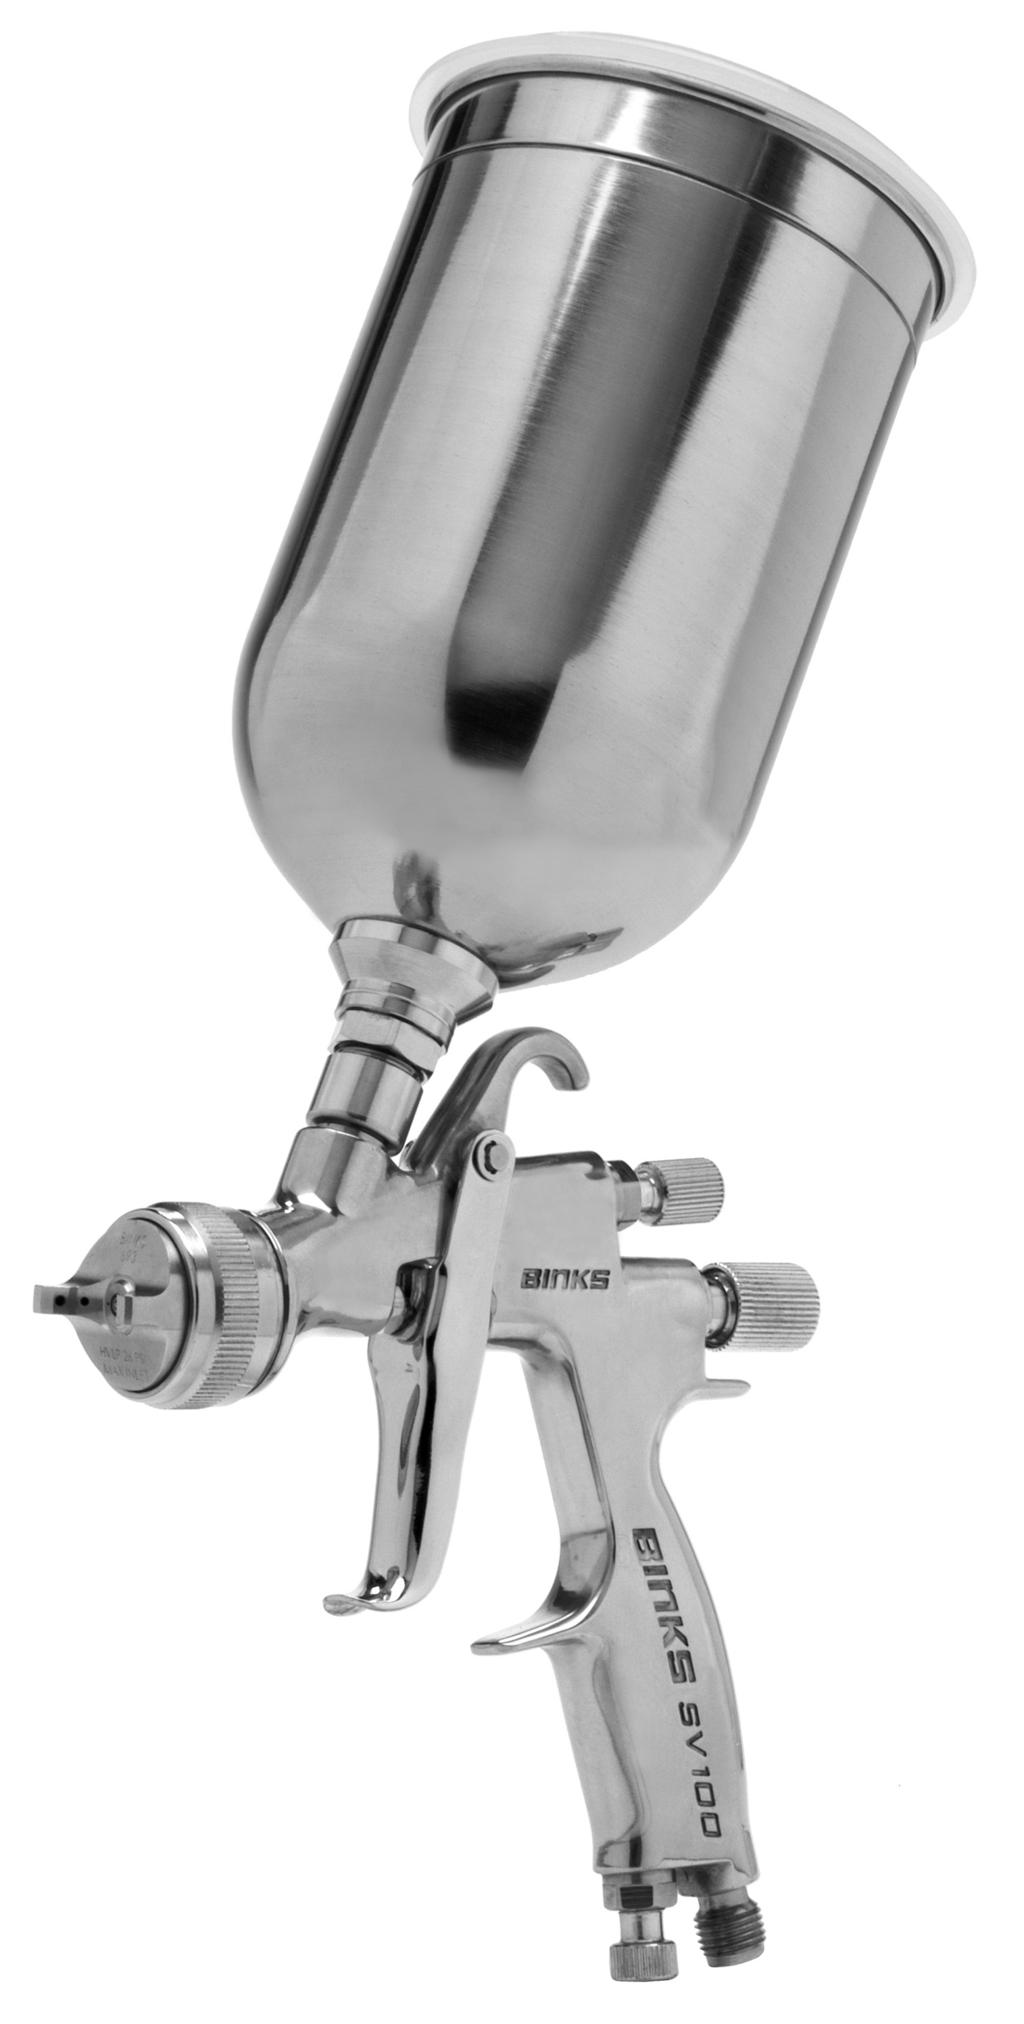 SERVICE MANUAL EN BINKS SV100 HVLP GRAVITY FEED SPRAY GUN 7042-6931-4 EN The following instructions provide the necessary information for the proper maintenance of the Binks SV100 gravity feed spray